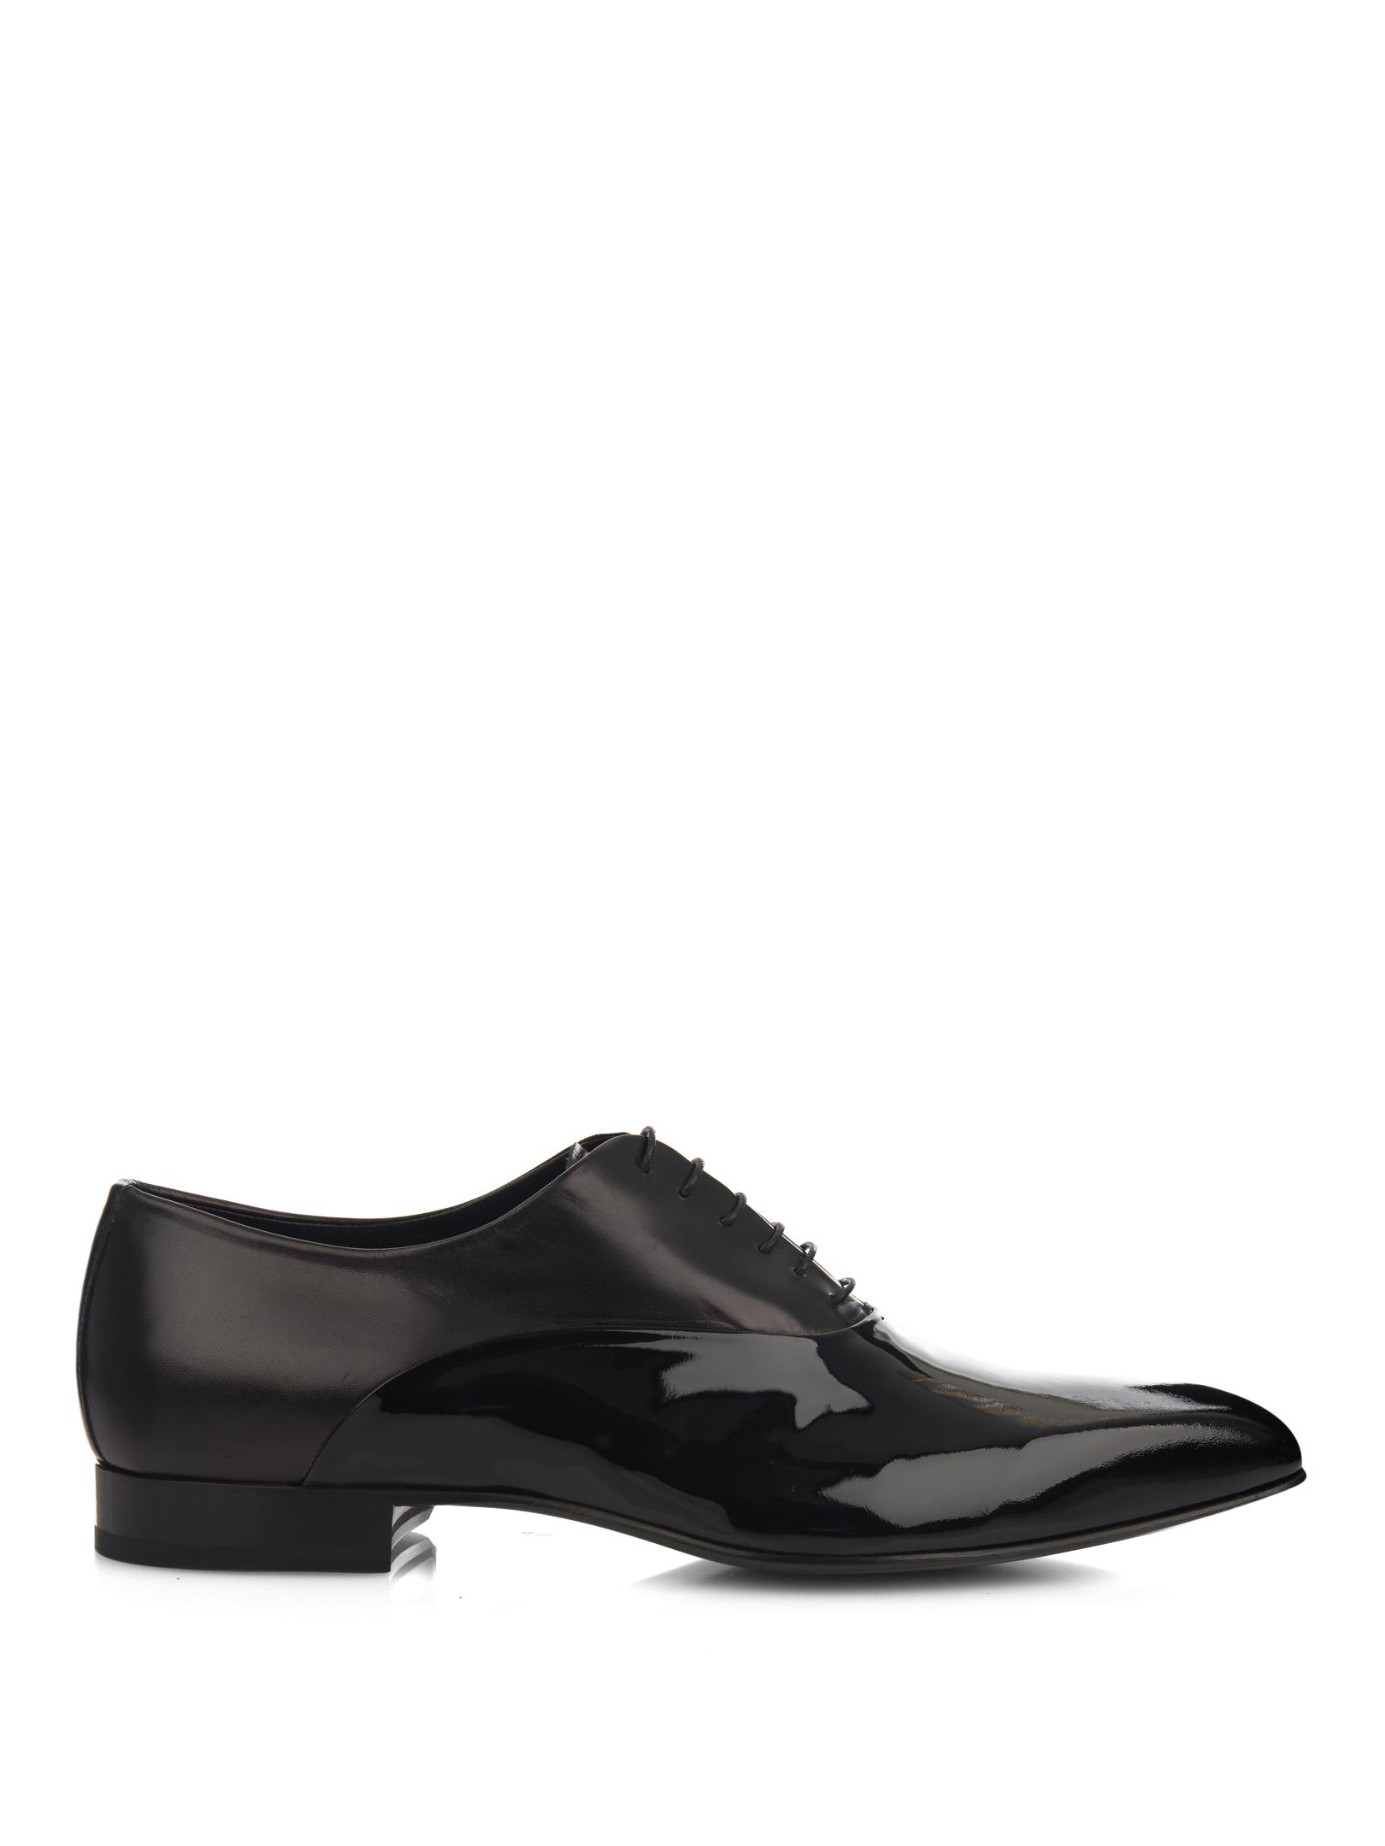 Lyst - Sergio Rossi Leather Lace-Up Shoes in Black for Men